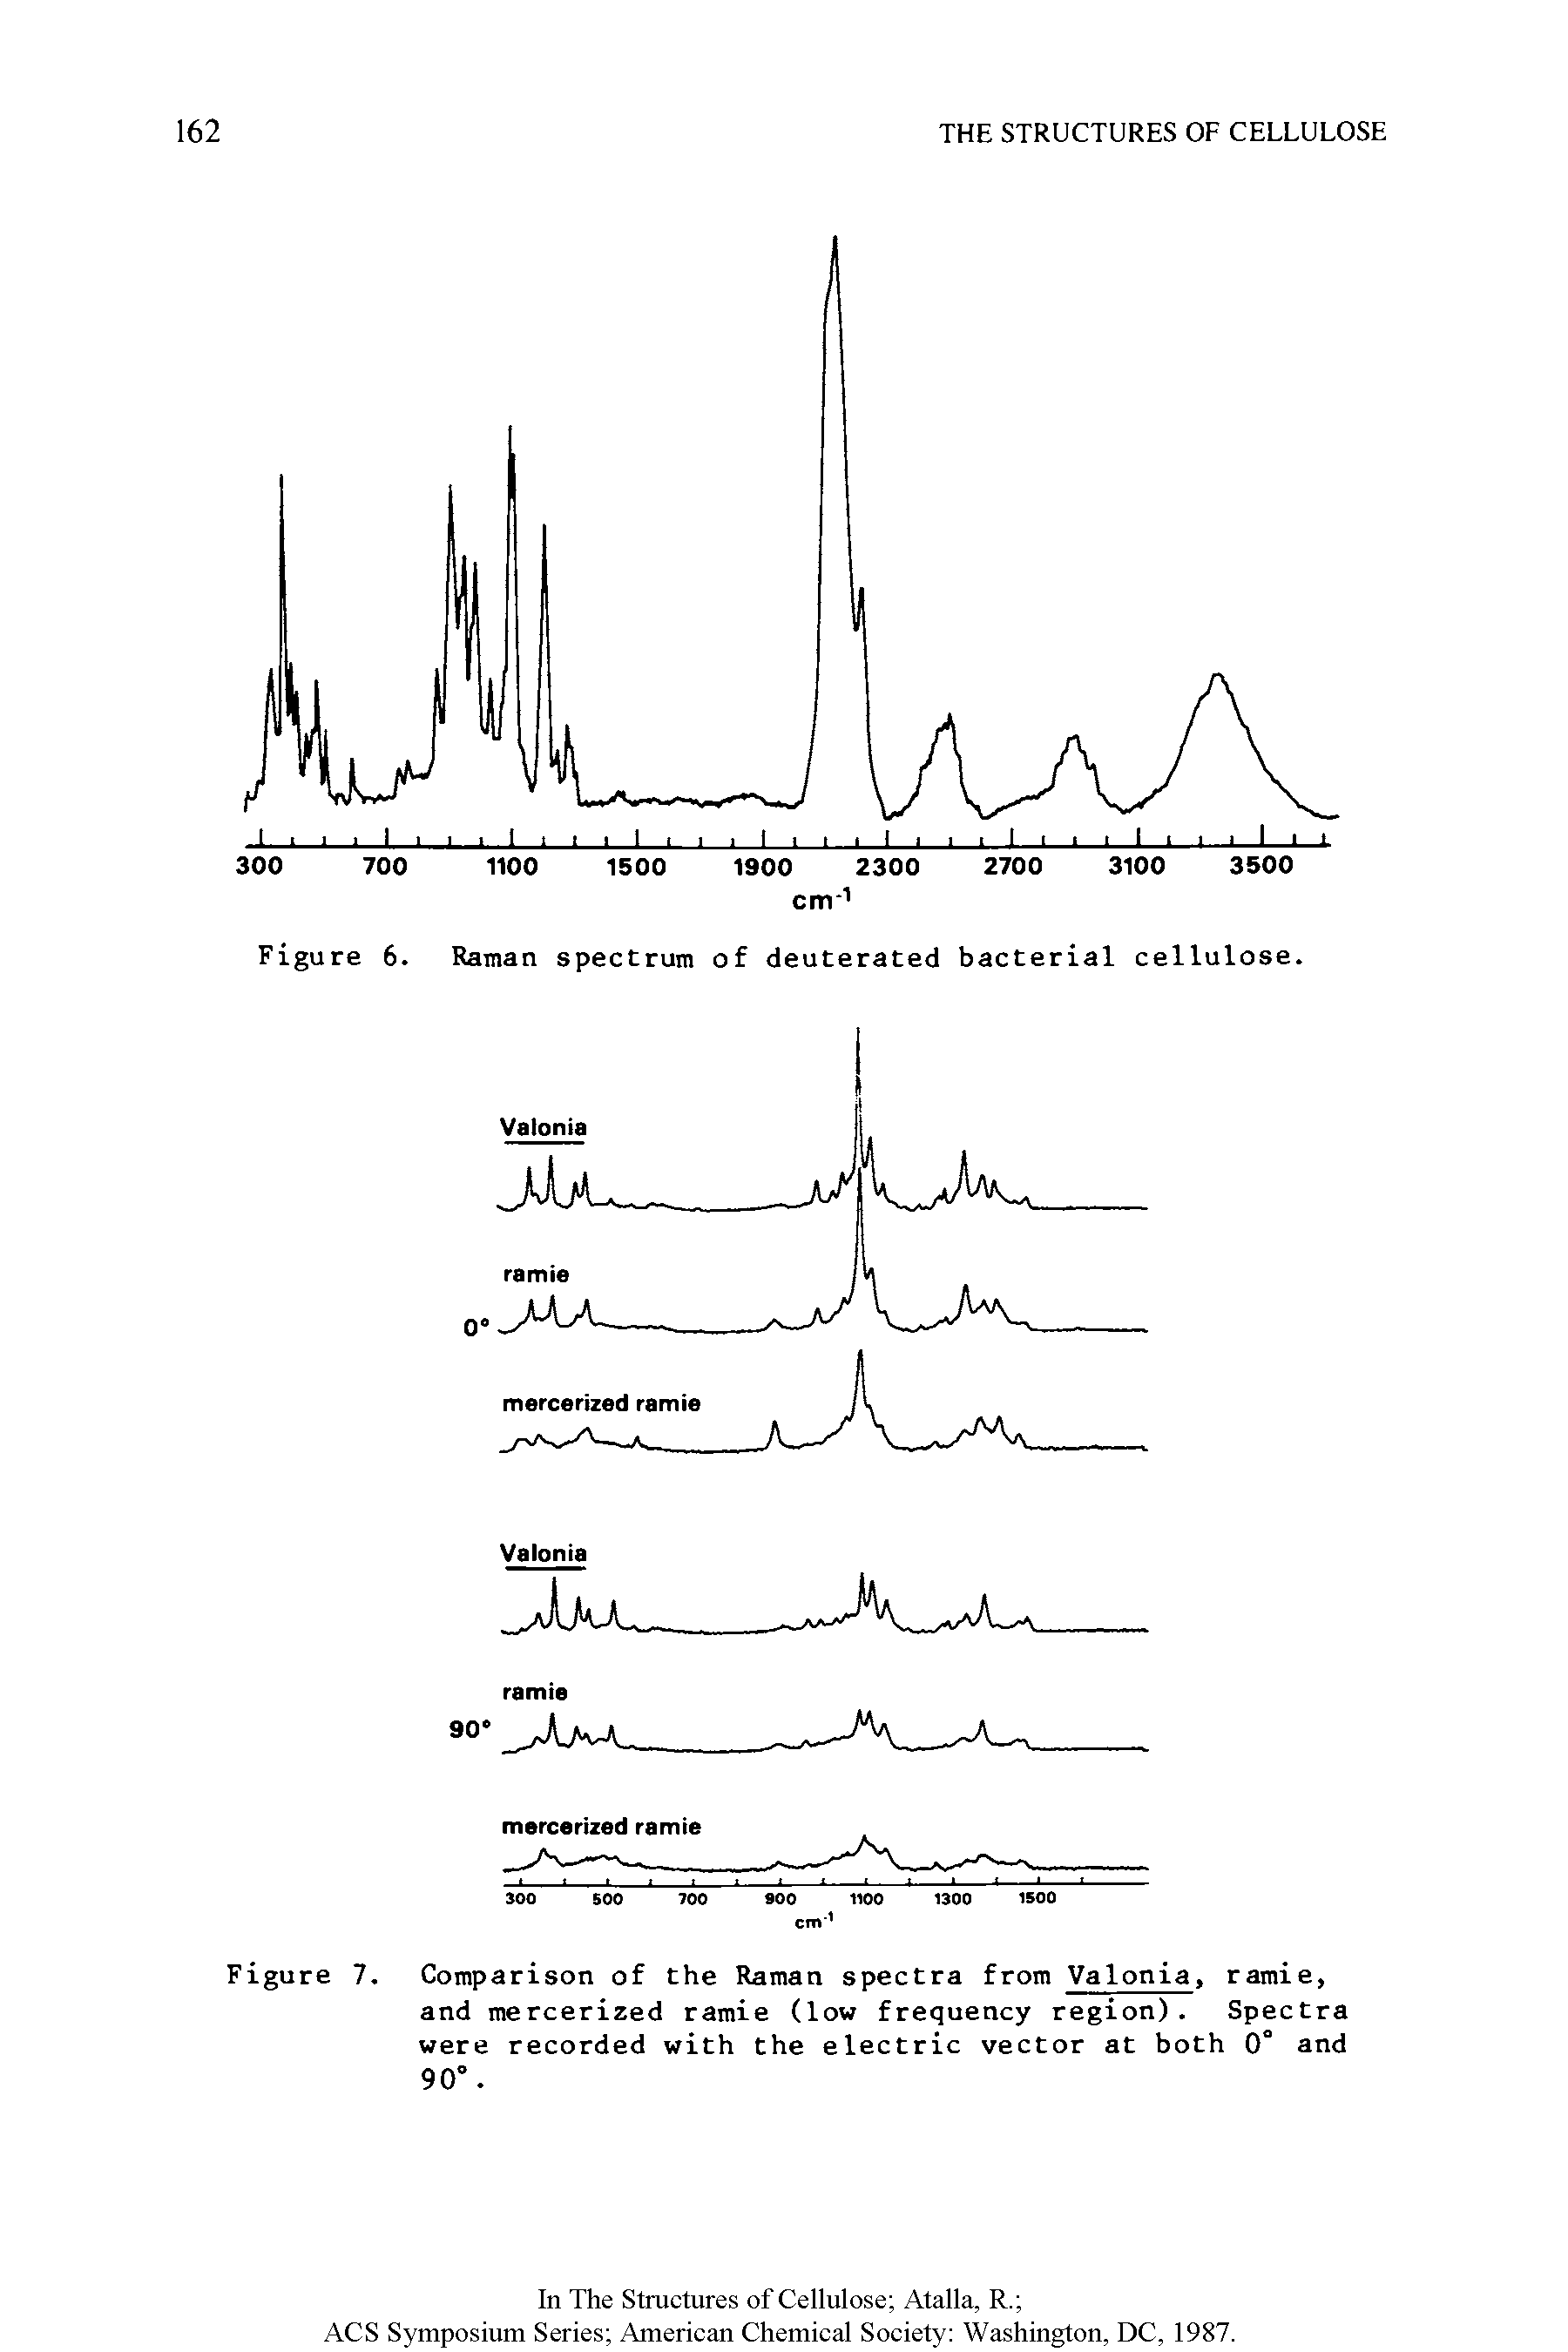 Figure 7. Comparison of the Raman spectra from Valonia, ramie, and mercerized ramie (low frequency region). Spectra were recorded with the electric vector at both 0 and 90°.